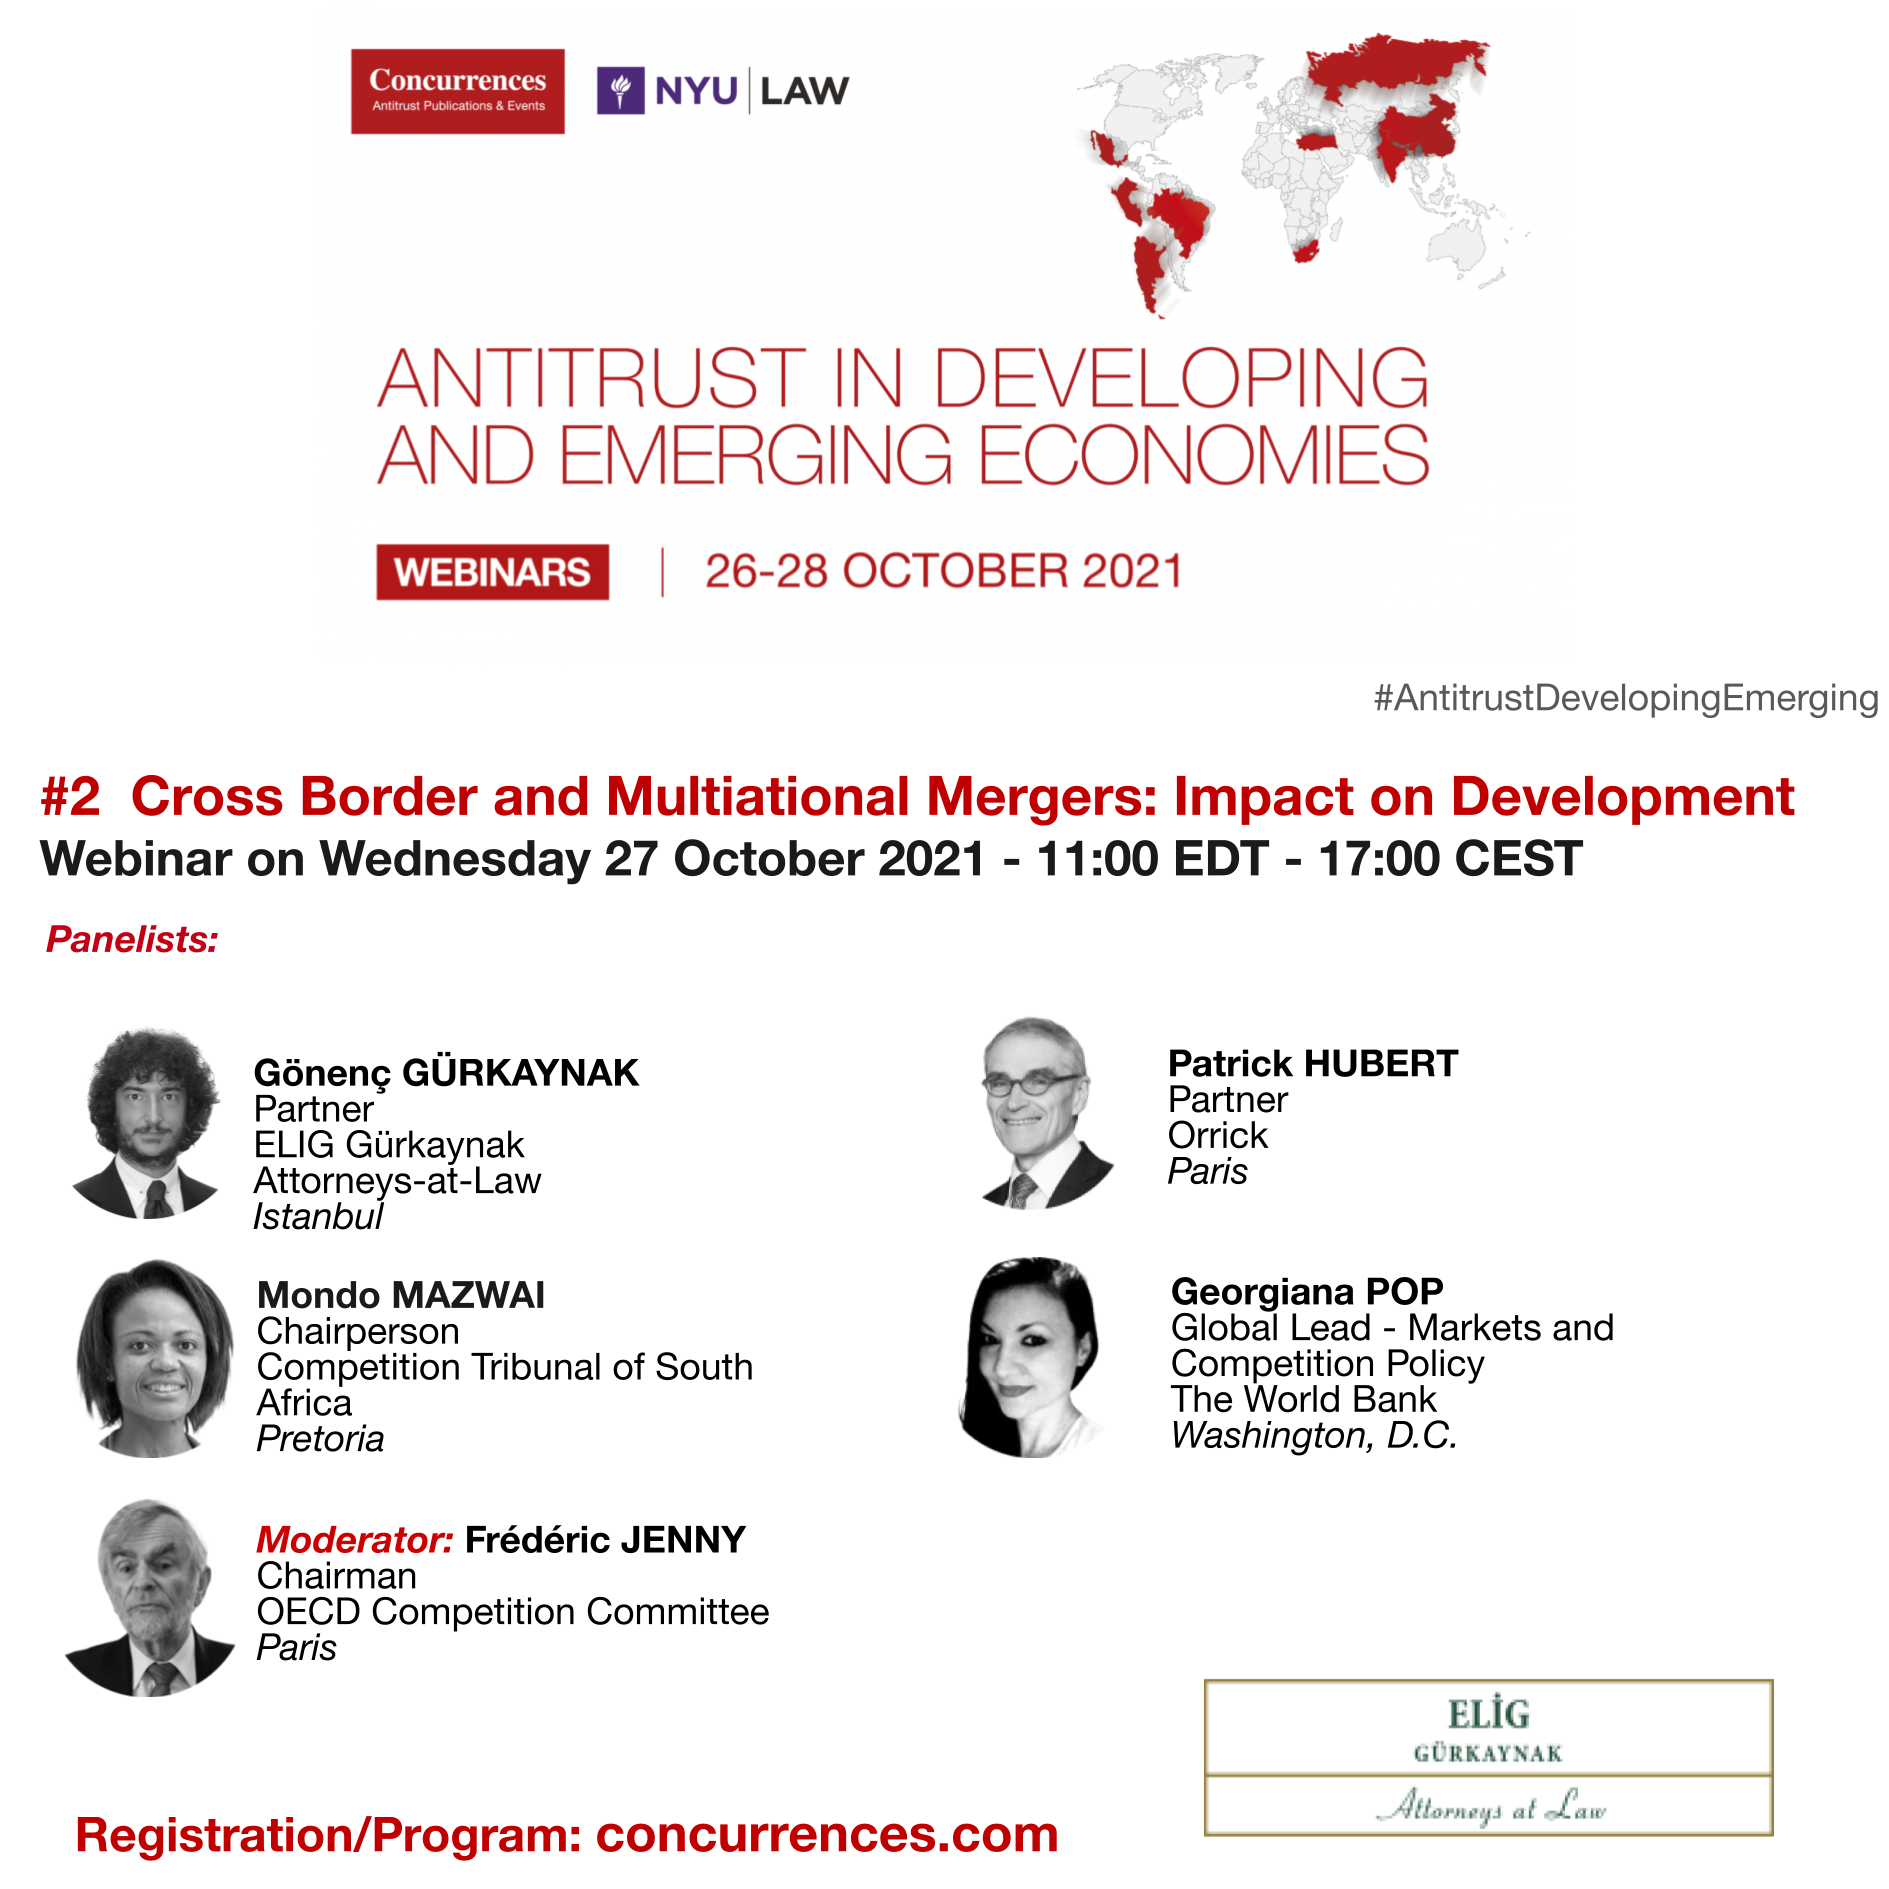 Concurrences Antitrust in Developing and Emerging Economies 